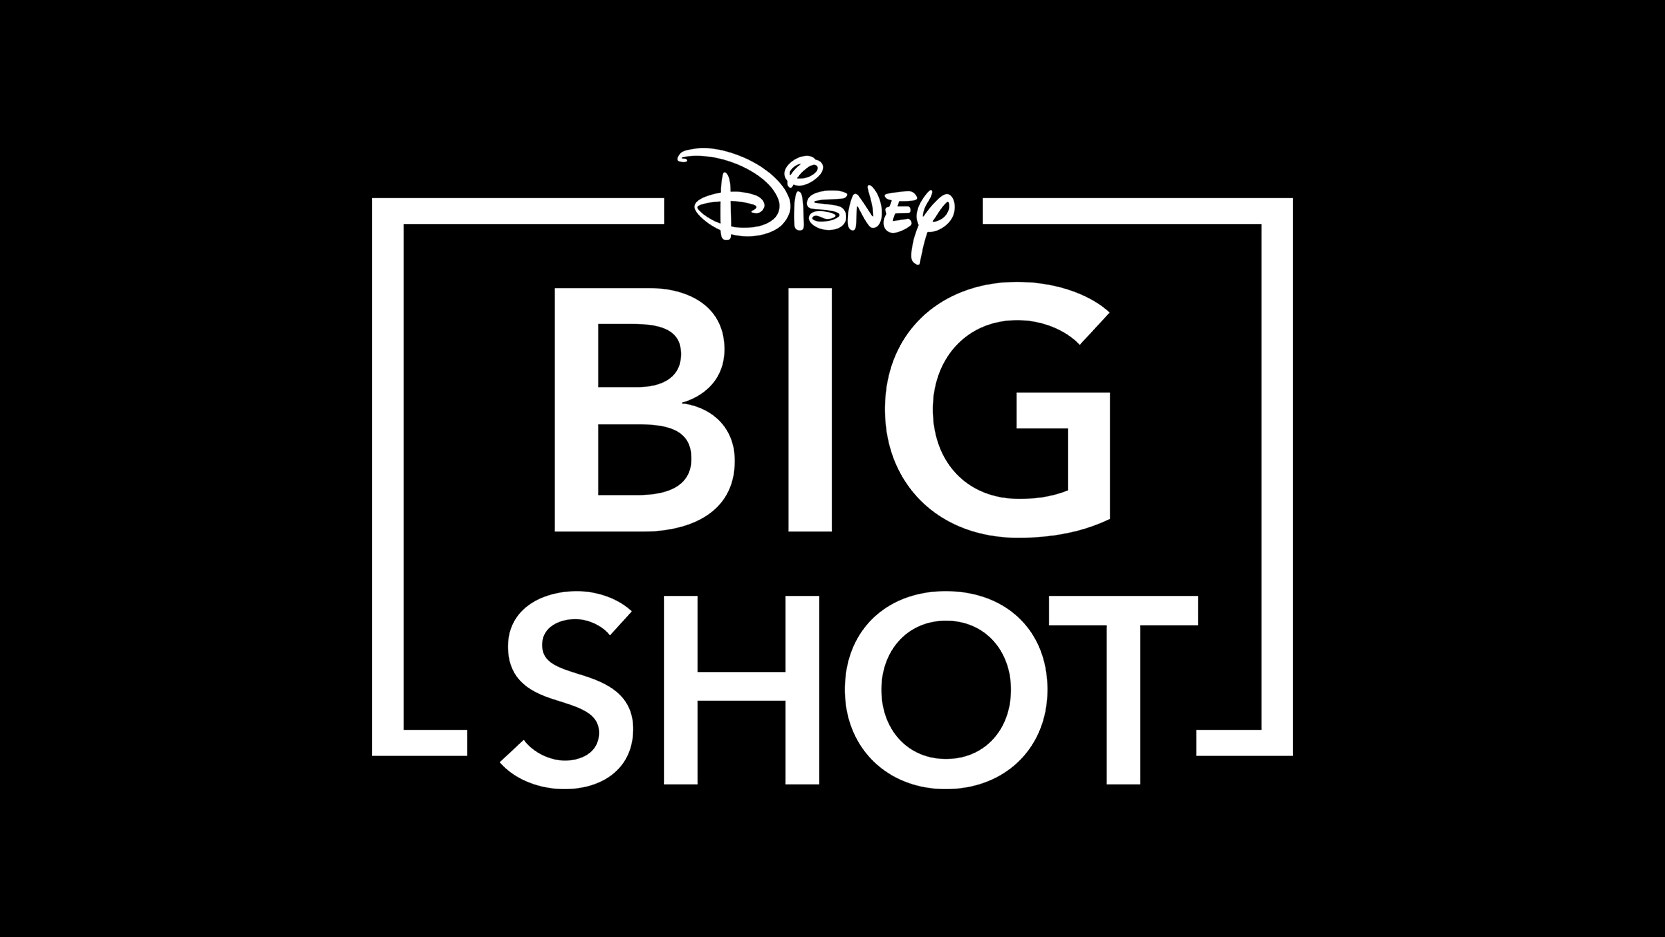 DISNEY+ RELEASES OFFICIAL TRAILER AND KEY ART FOR THE UPCOMING ORIGNAL SERIES “BIG SHOT” 